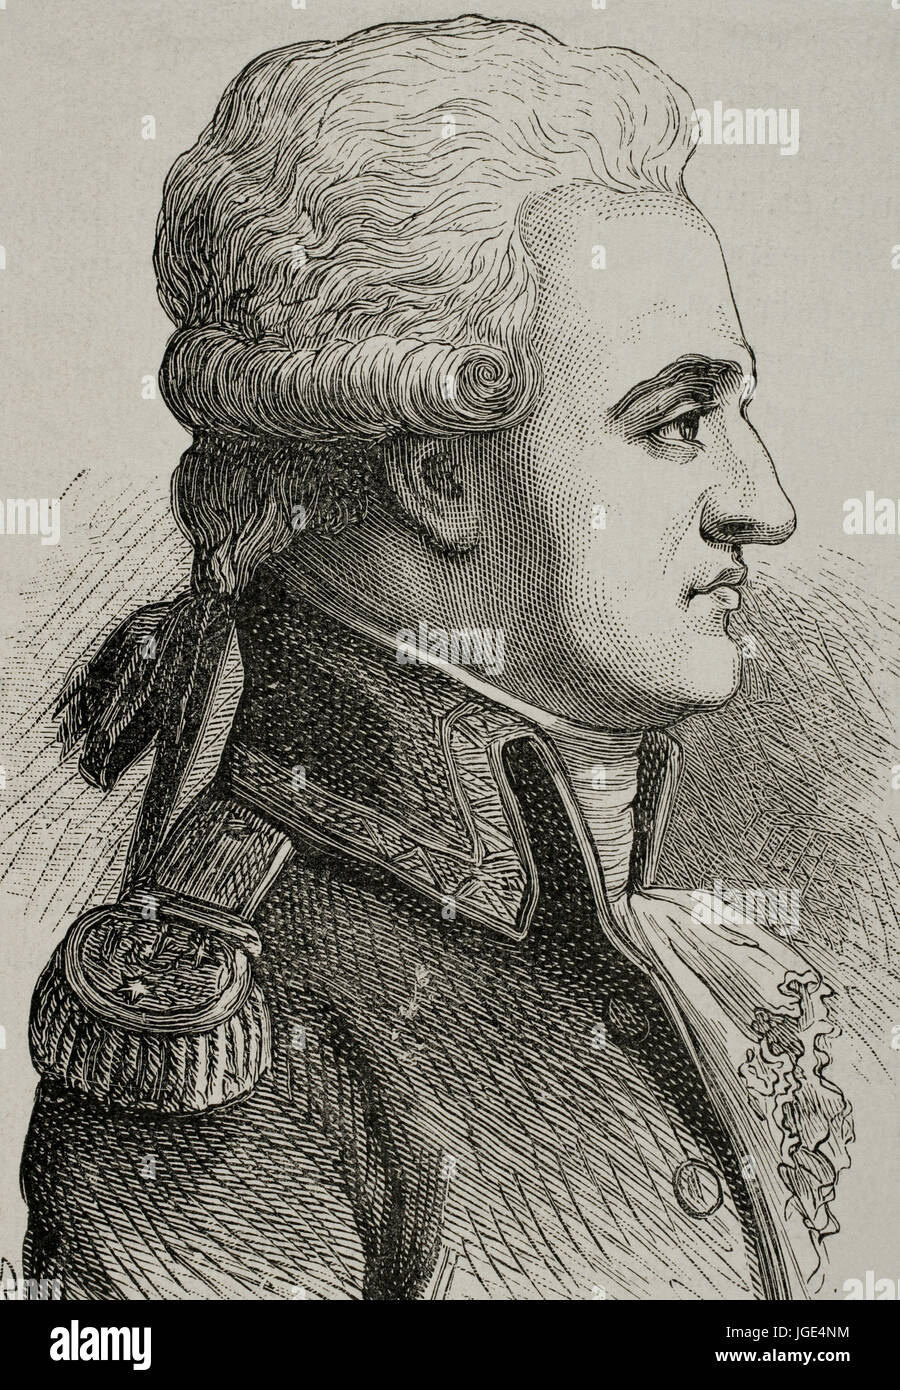 Pierre Charles Silvestre de Villeneuve (1763-1806). French naval officer. Portrait by E. Thuirs in History of France, 1883. Stock Photo